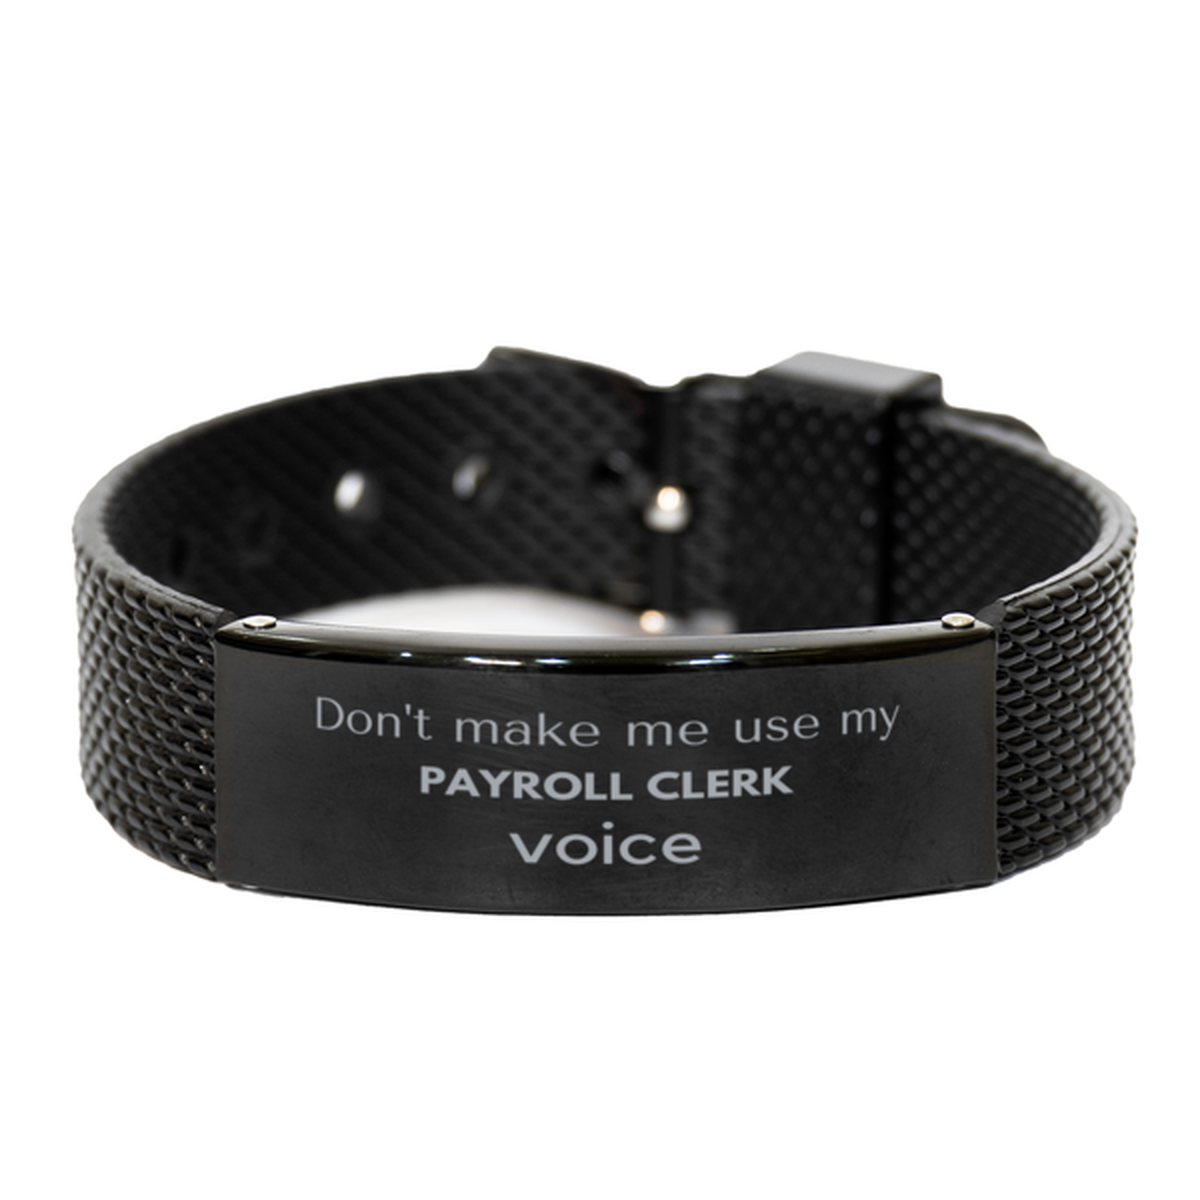 Don't make me use my Payroll Clerk voice, Sarcasm Payroll Clerk Gifts, Christmas Payroll Clerk Black Shark Mesh Bracelet Birthday Unique Gifts For Payroll Clerk Coworkers, Men, Women, Colleague, Friends